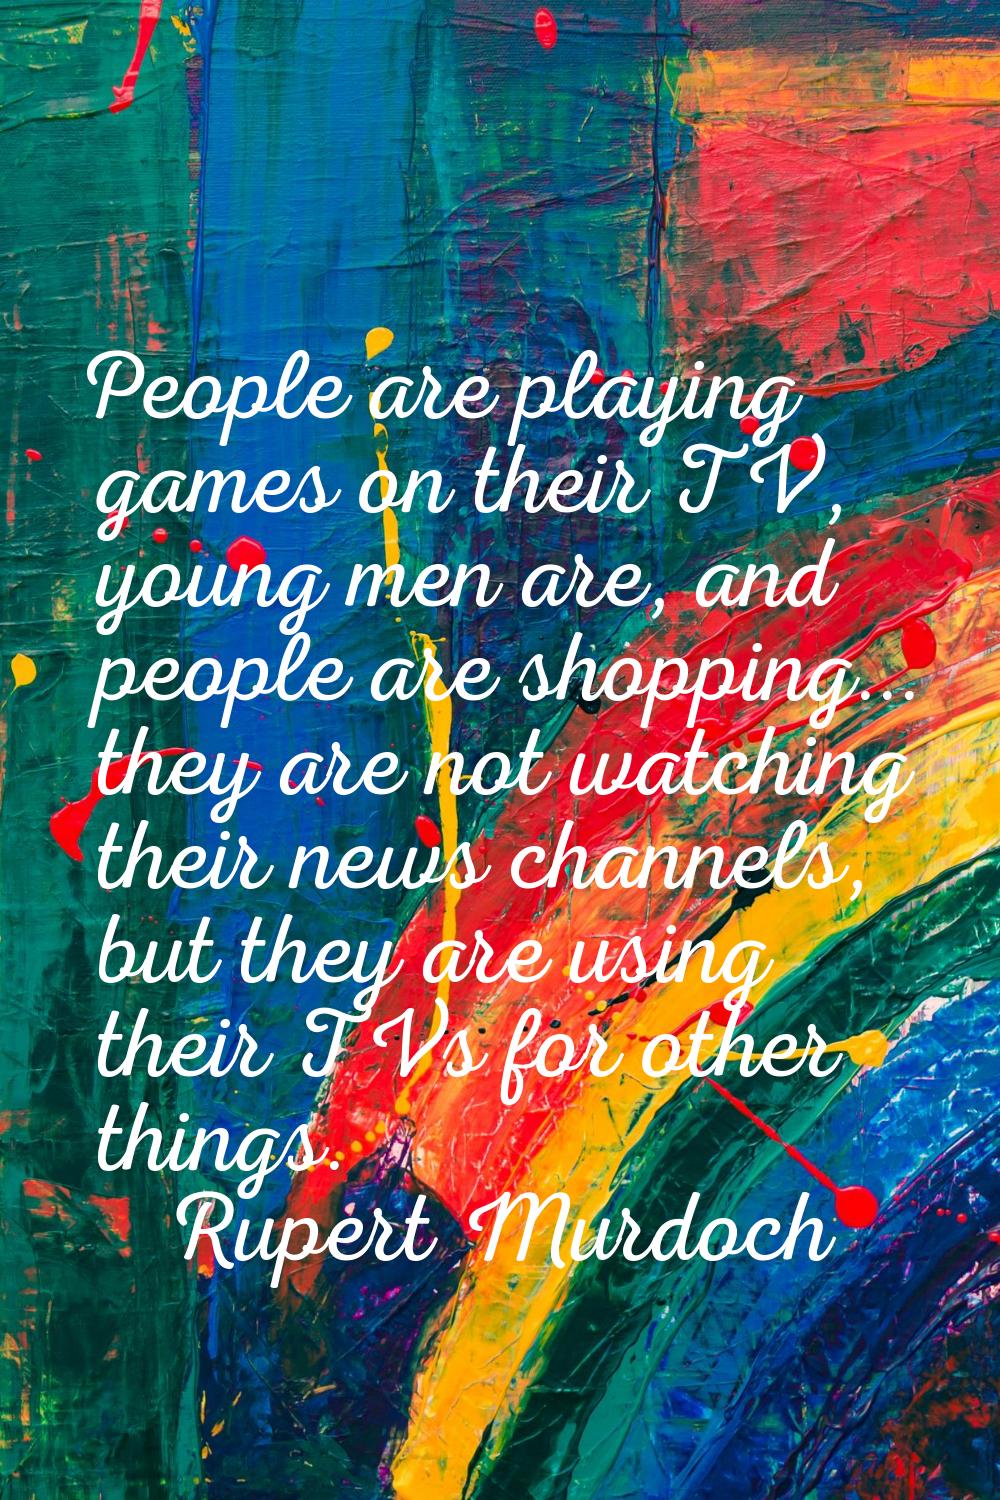 People are playing games on their TV, young men are, and people are shopping... they are not watchi